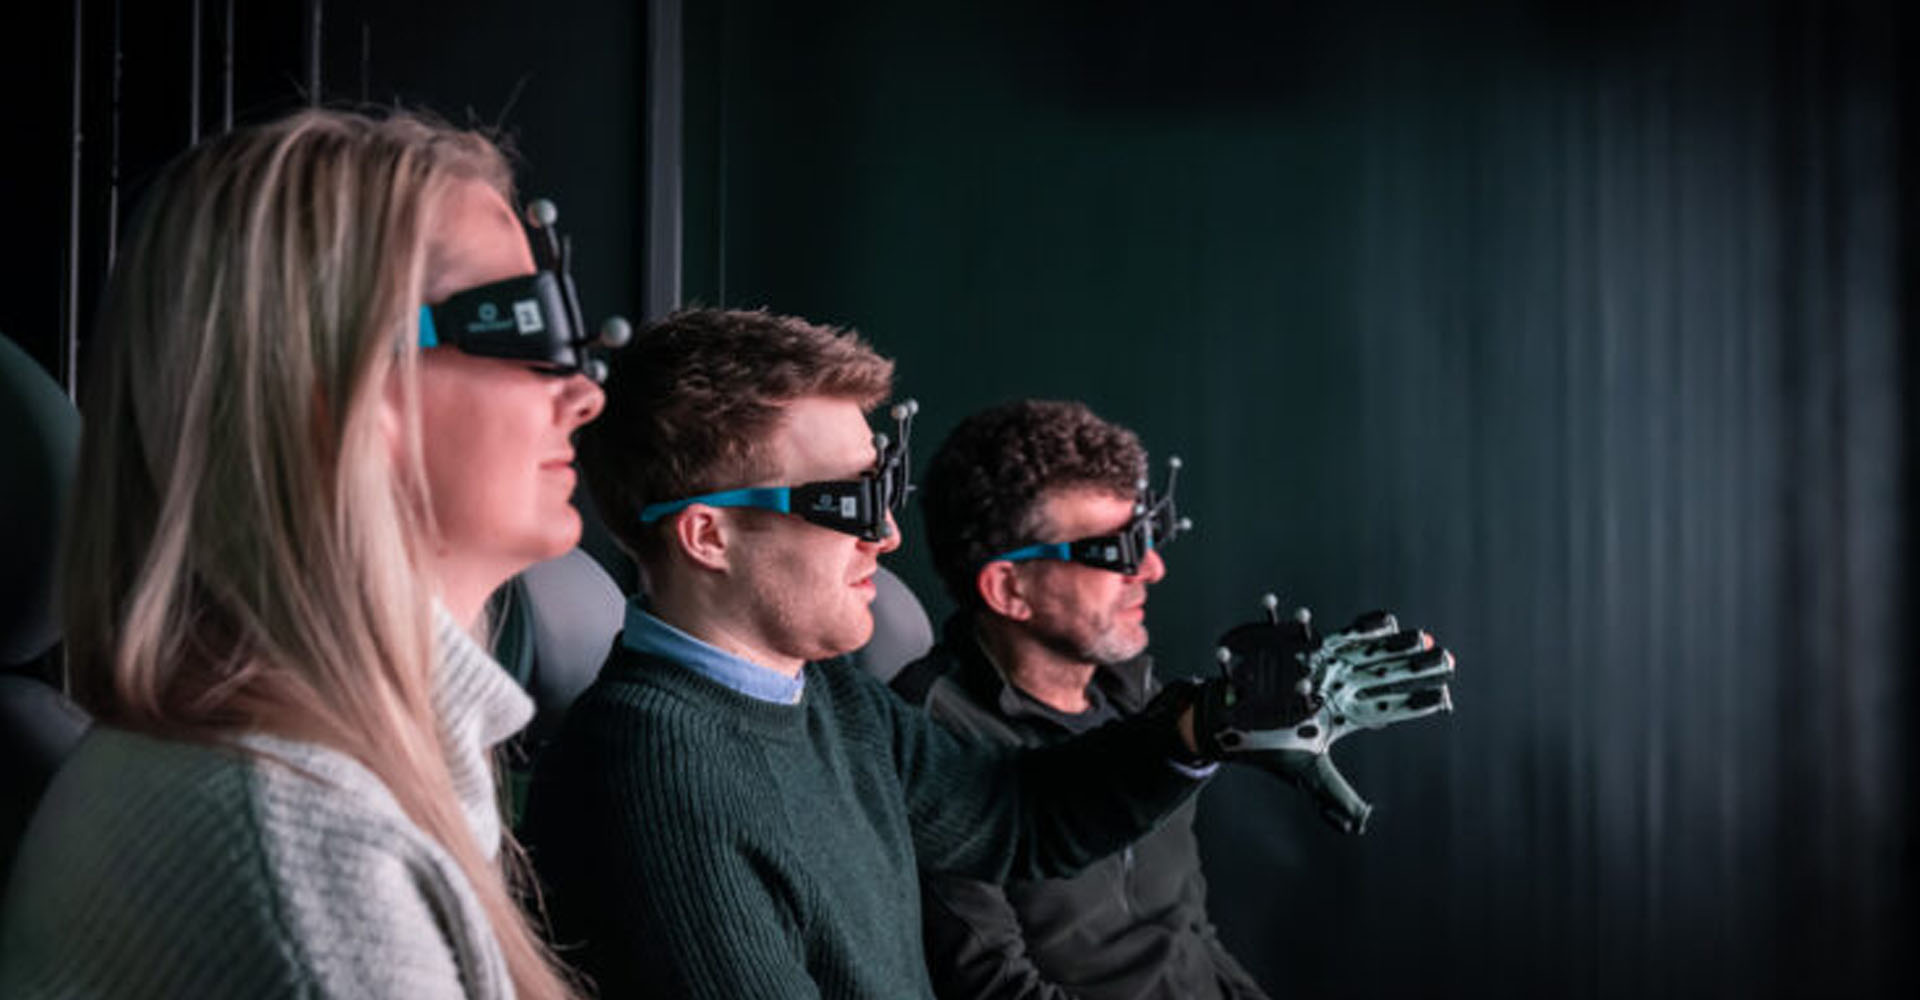 Three people using virtual reality headsets and glove